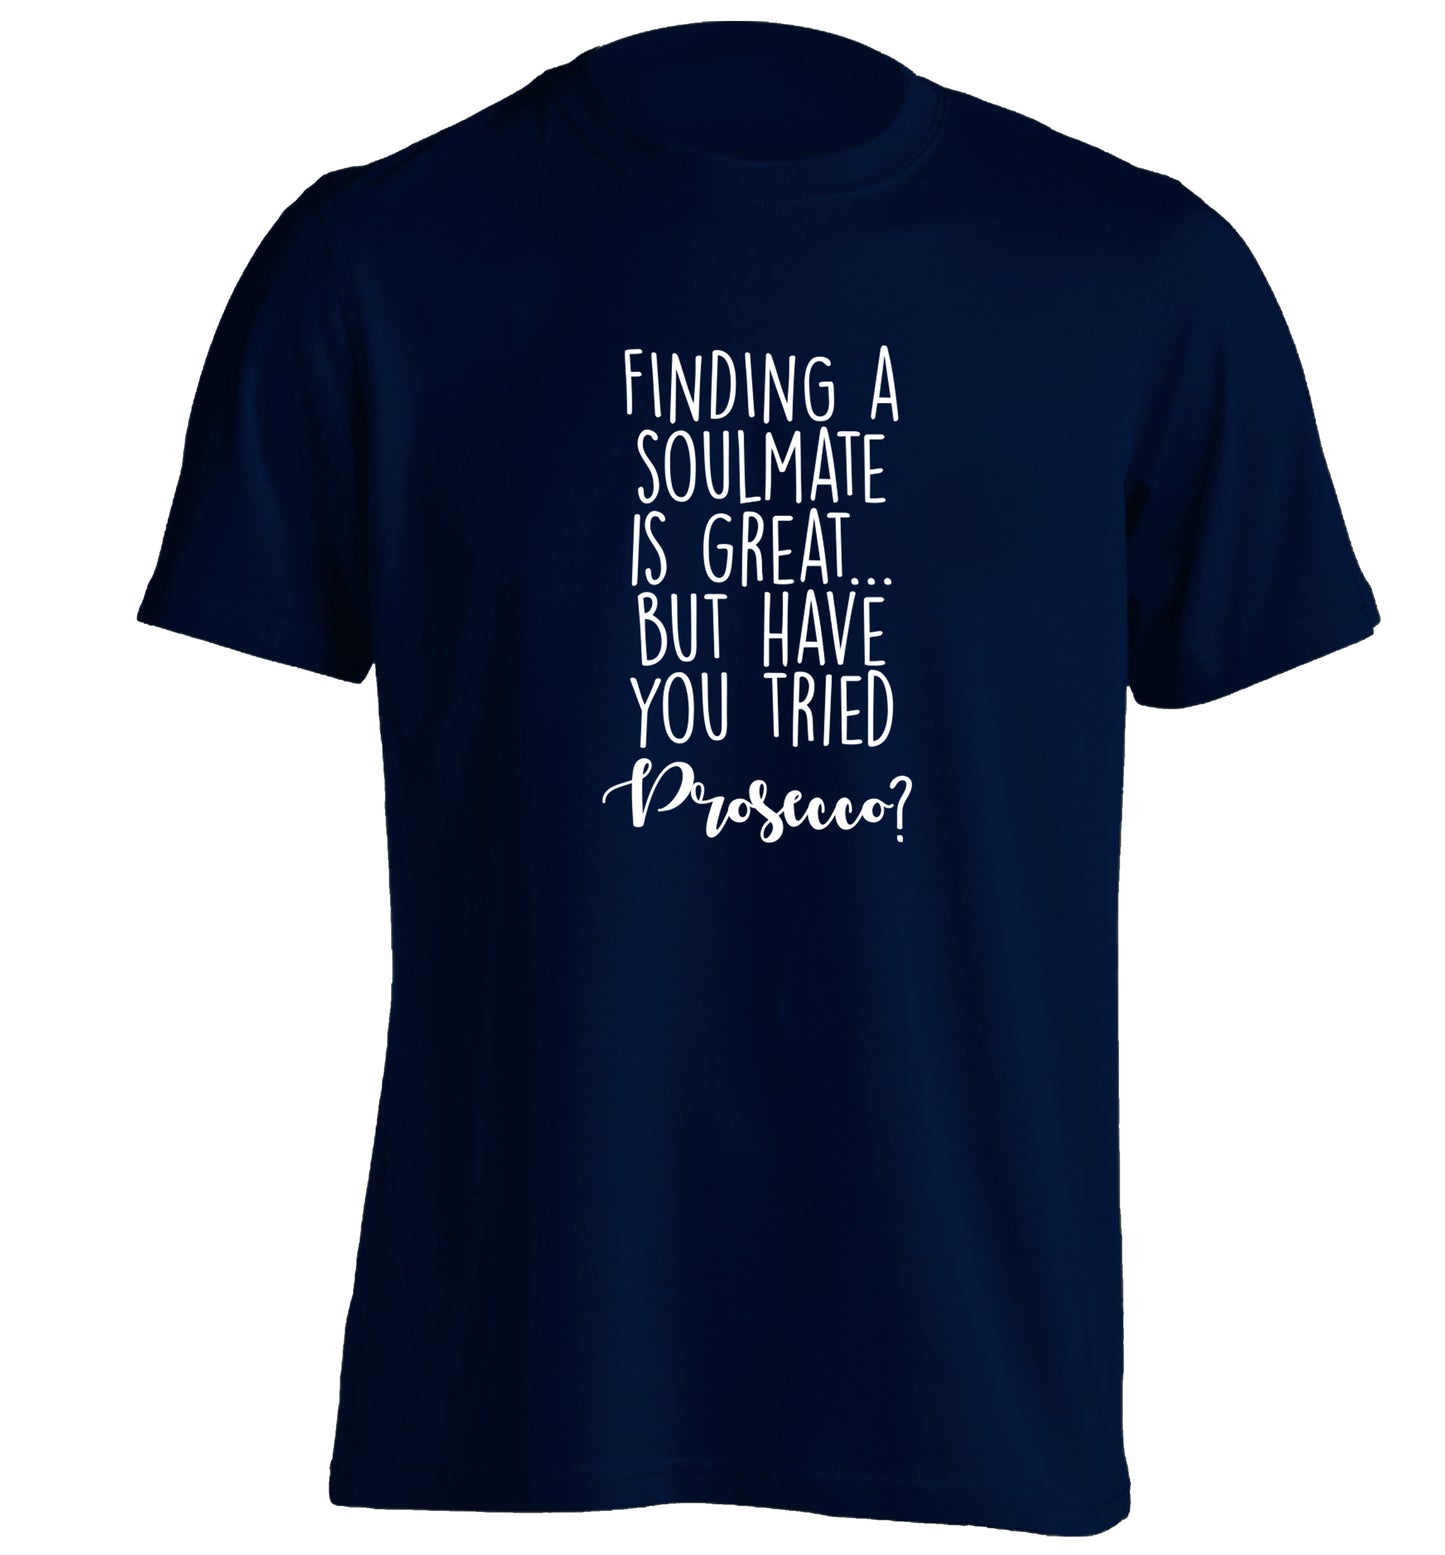 Finding a soulmate is great but have you tried prosecco? adults unisex navy Tshirt 2XL